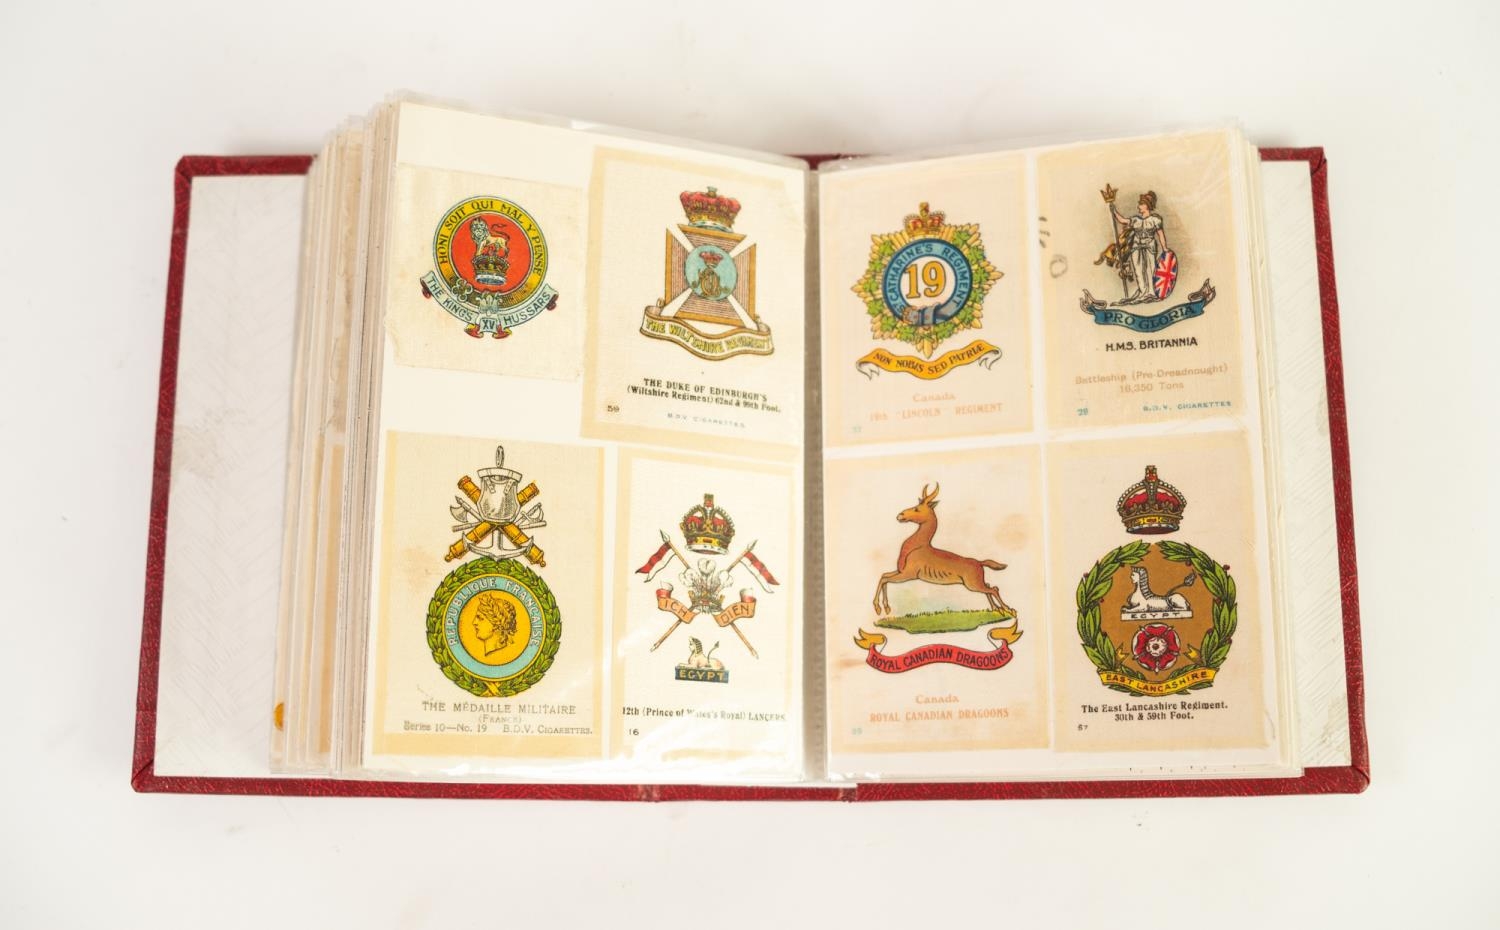 SMALL ALBUM CONTAINING A SELECTION OF BDV AND OTHERS CIGARETTE SILKS, in various sizes to include 24